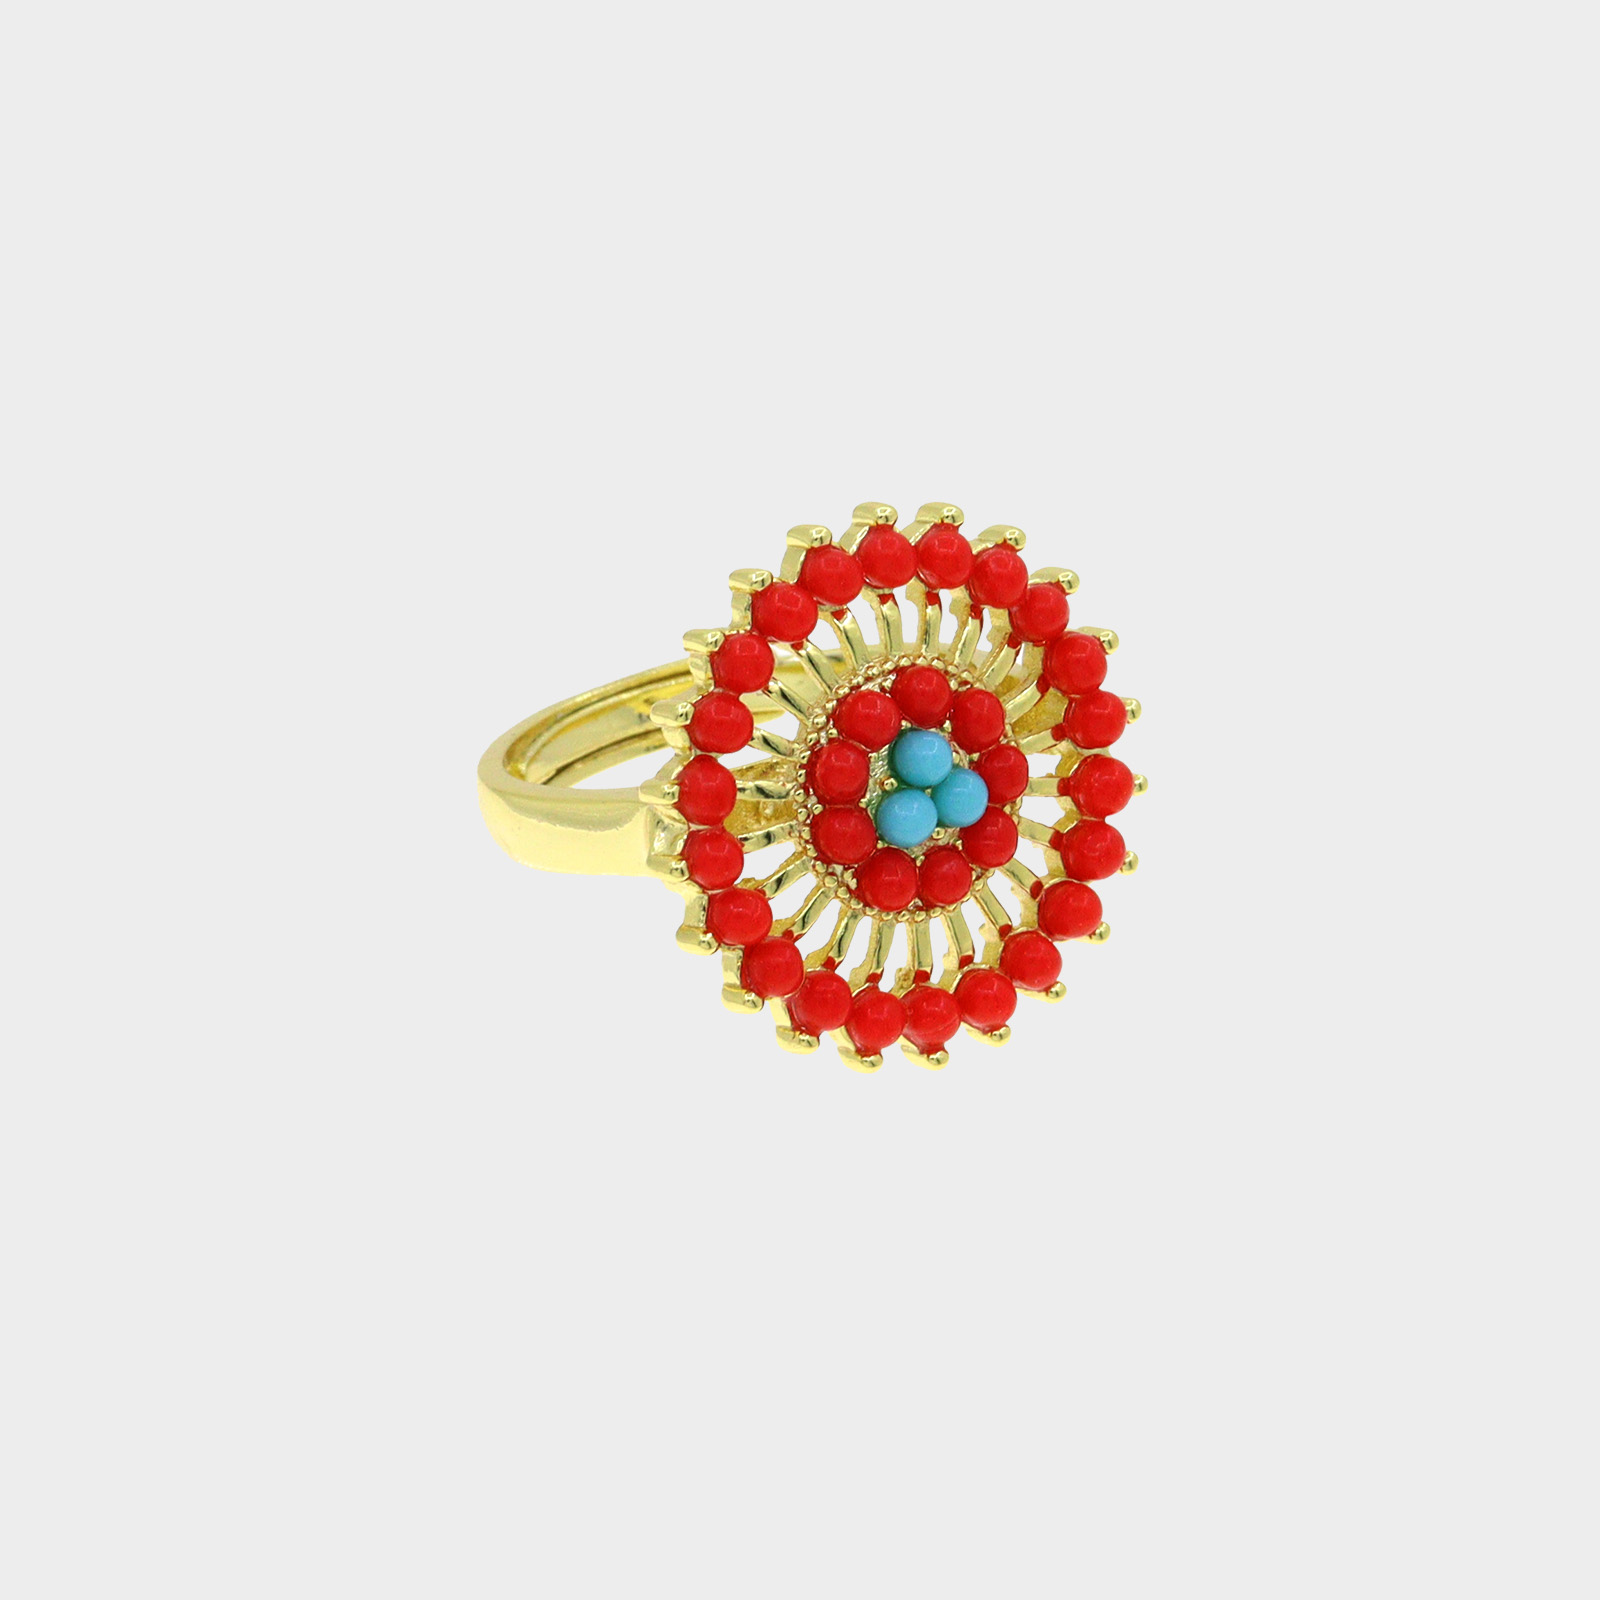 The Ring Amazon Flower Red